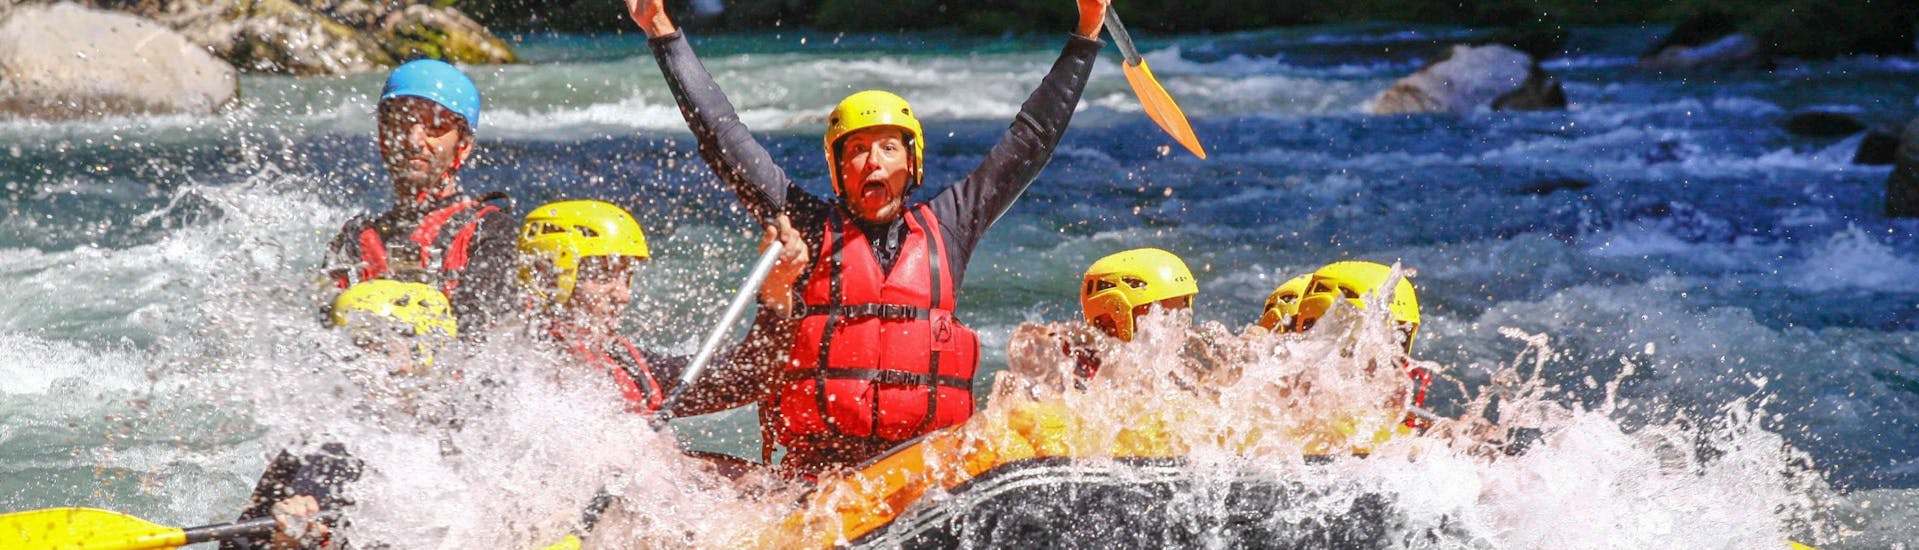 A group of friends is having fun on the Dranse River during a rafting tour with Evolution 2 Aquarafting Lake Geneva.